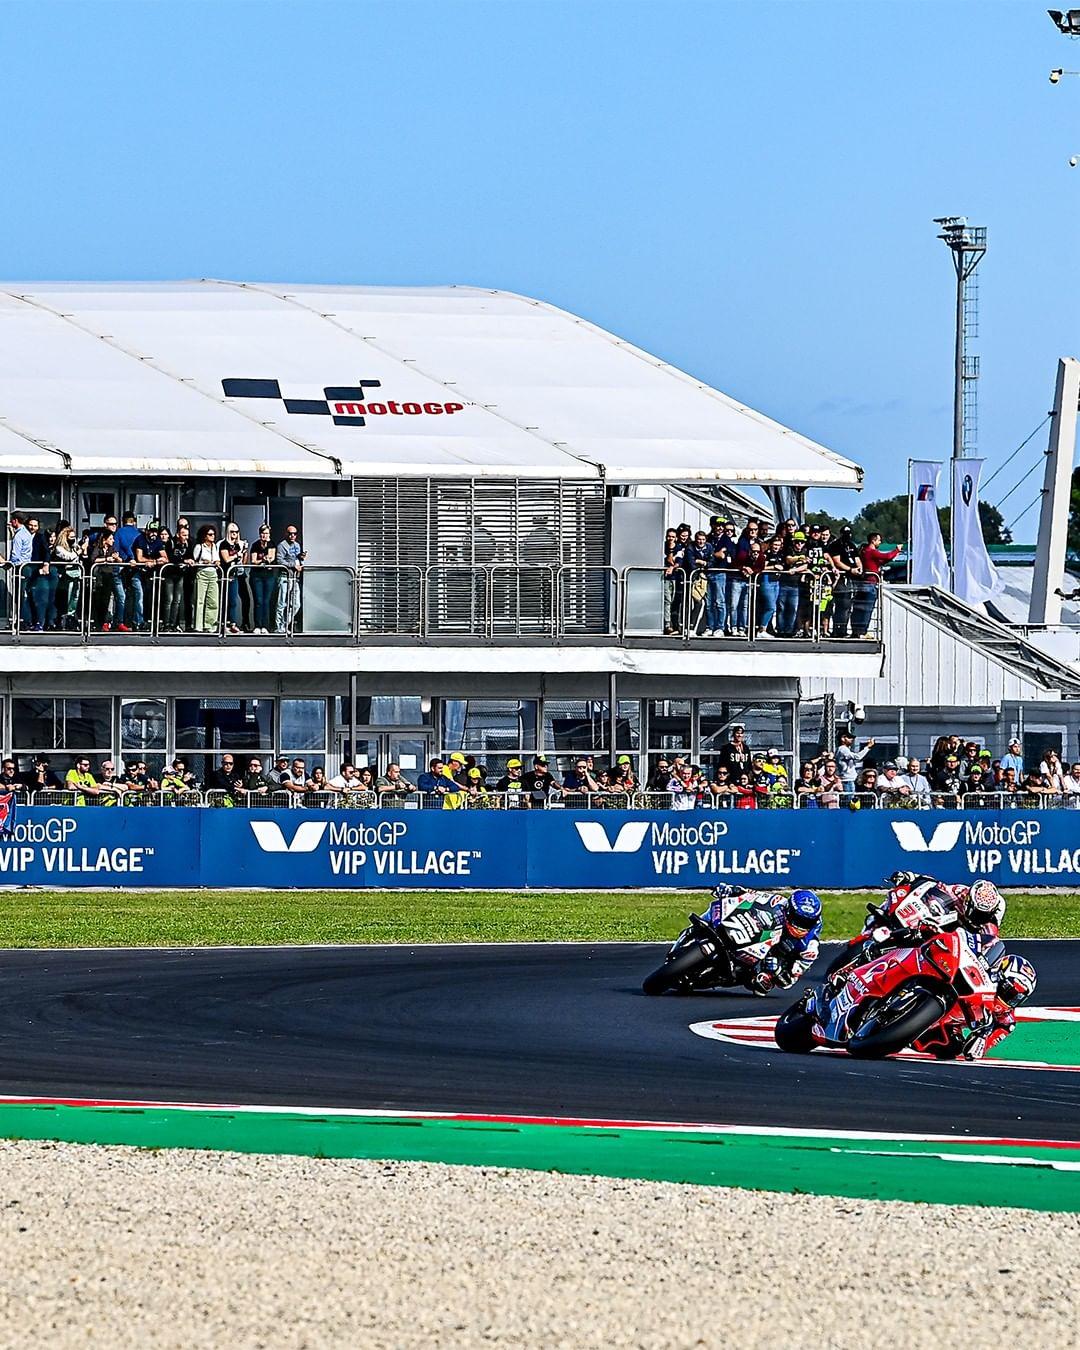 An enthralling season witnessed in absolute luxury 🙌 From cocktails track side to pictures in the pits, visit the link in our bio to get the full #VIP treatment at the #MotoGP VIP Village 😎 #Motorsport #Motorcycle #Racing